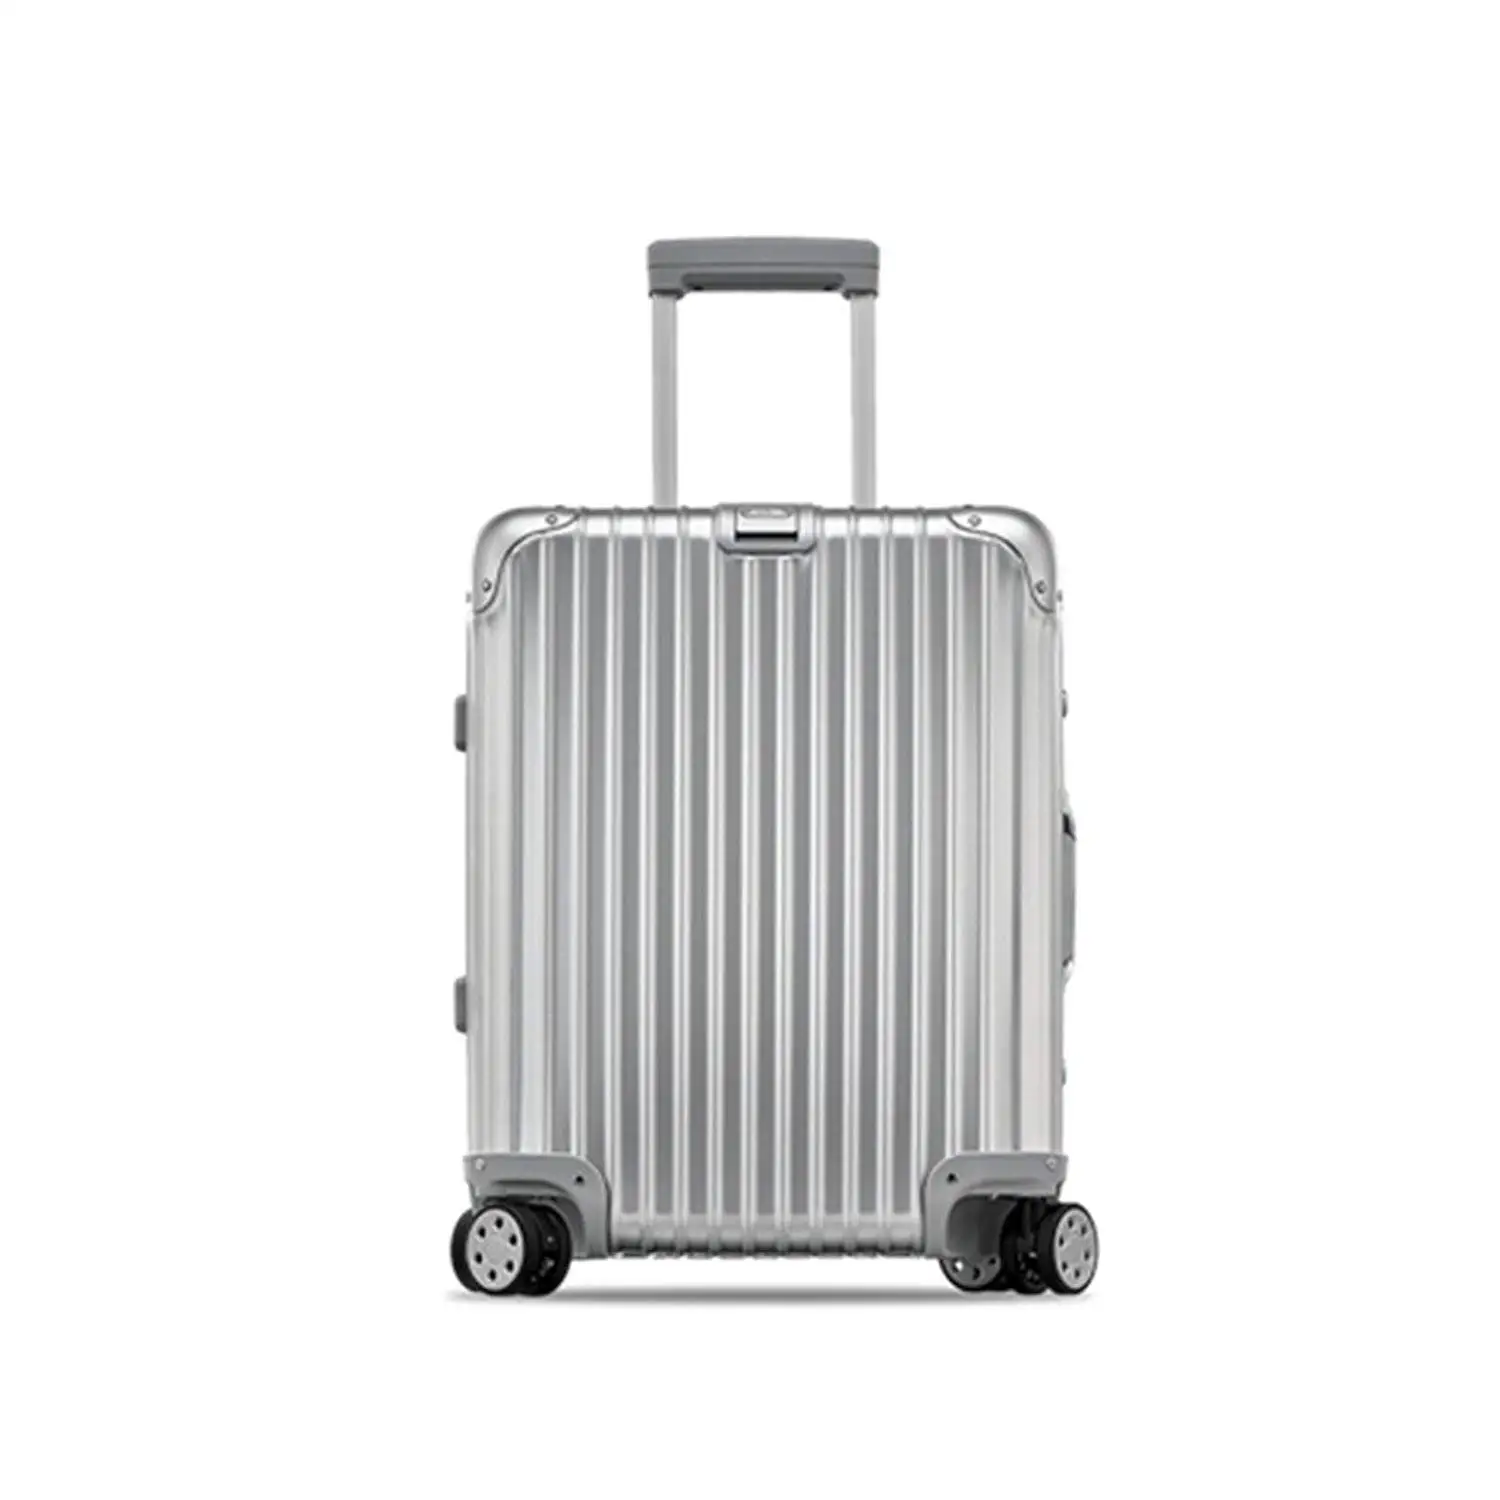 Cheap Rimowa Luggage Outlet, find 